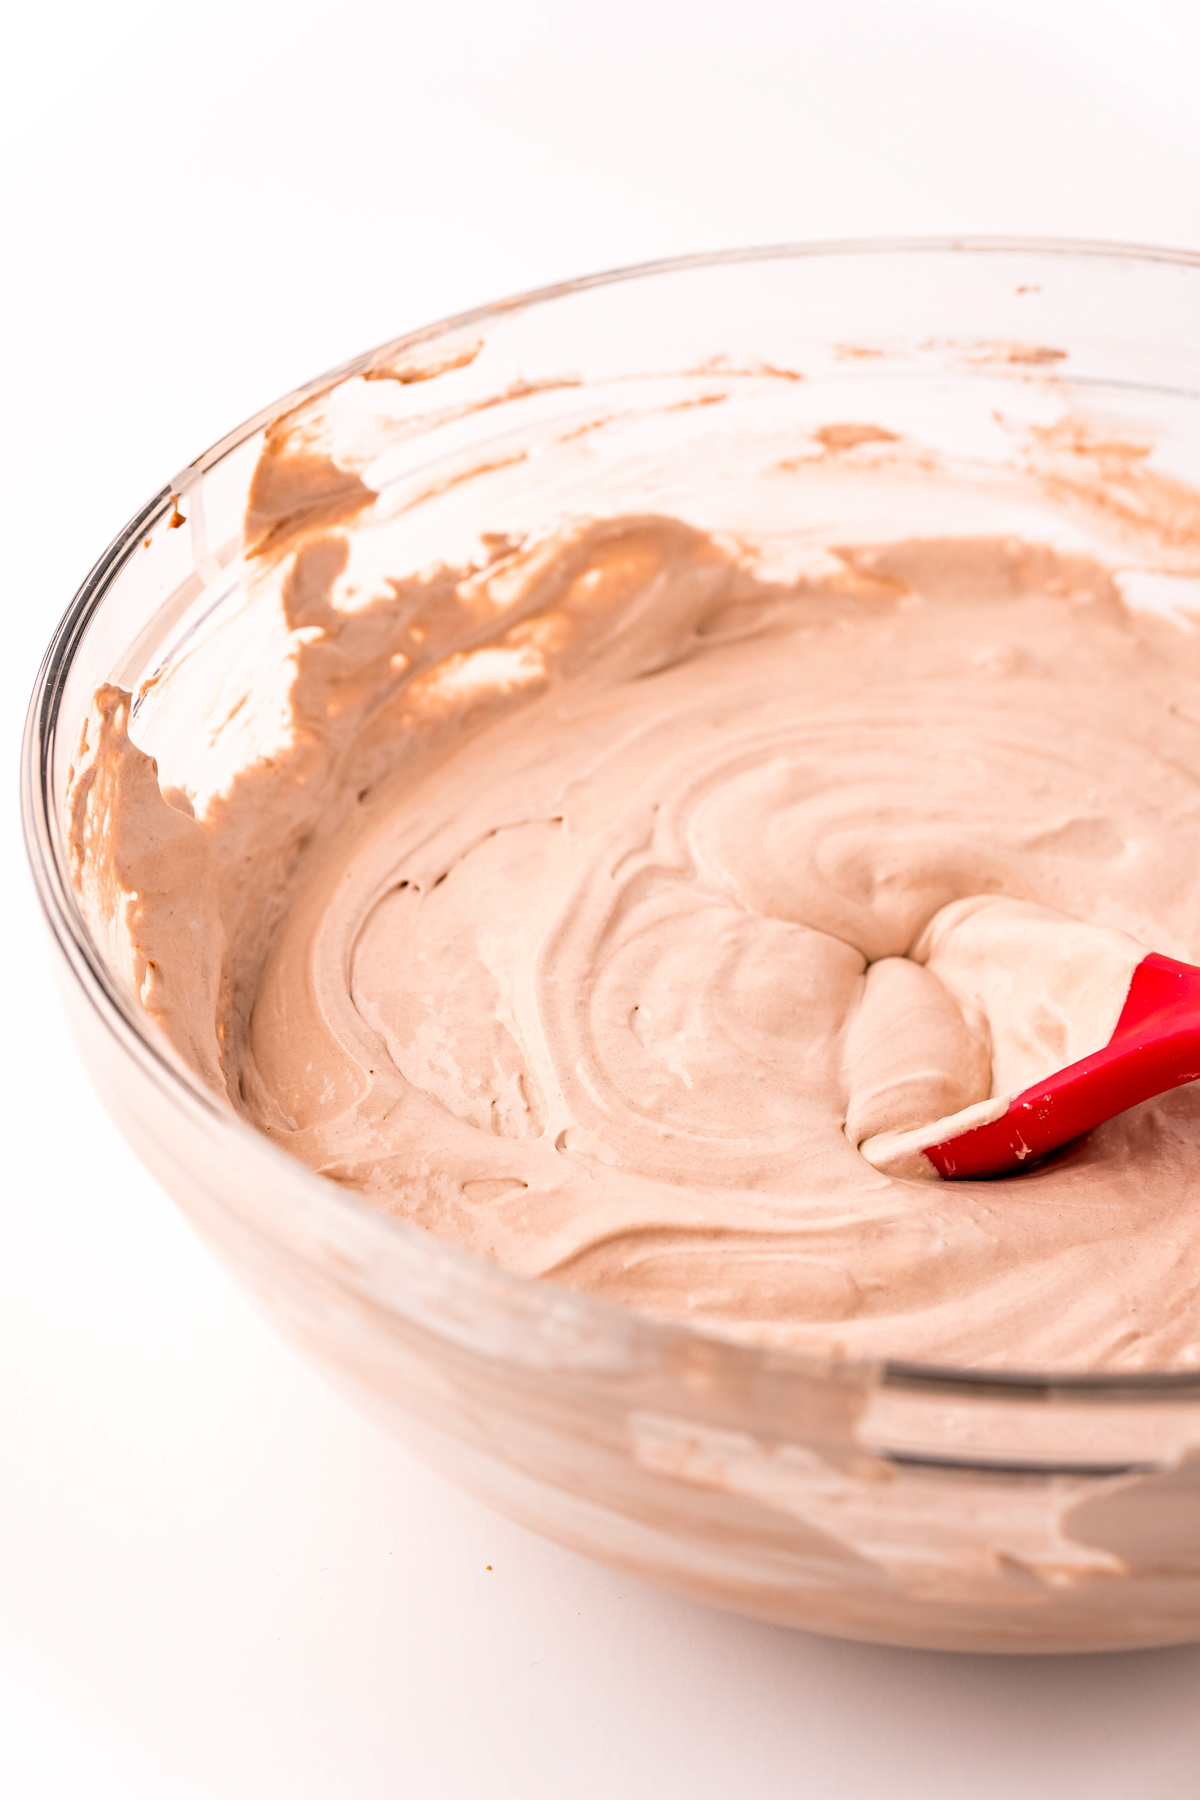 hot chocolate dip in a glass bowl